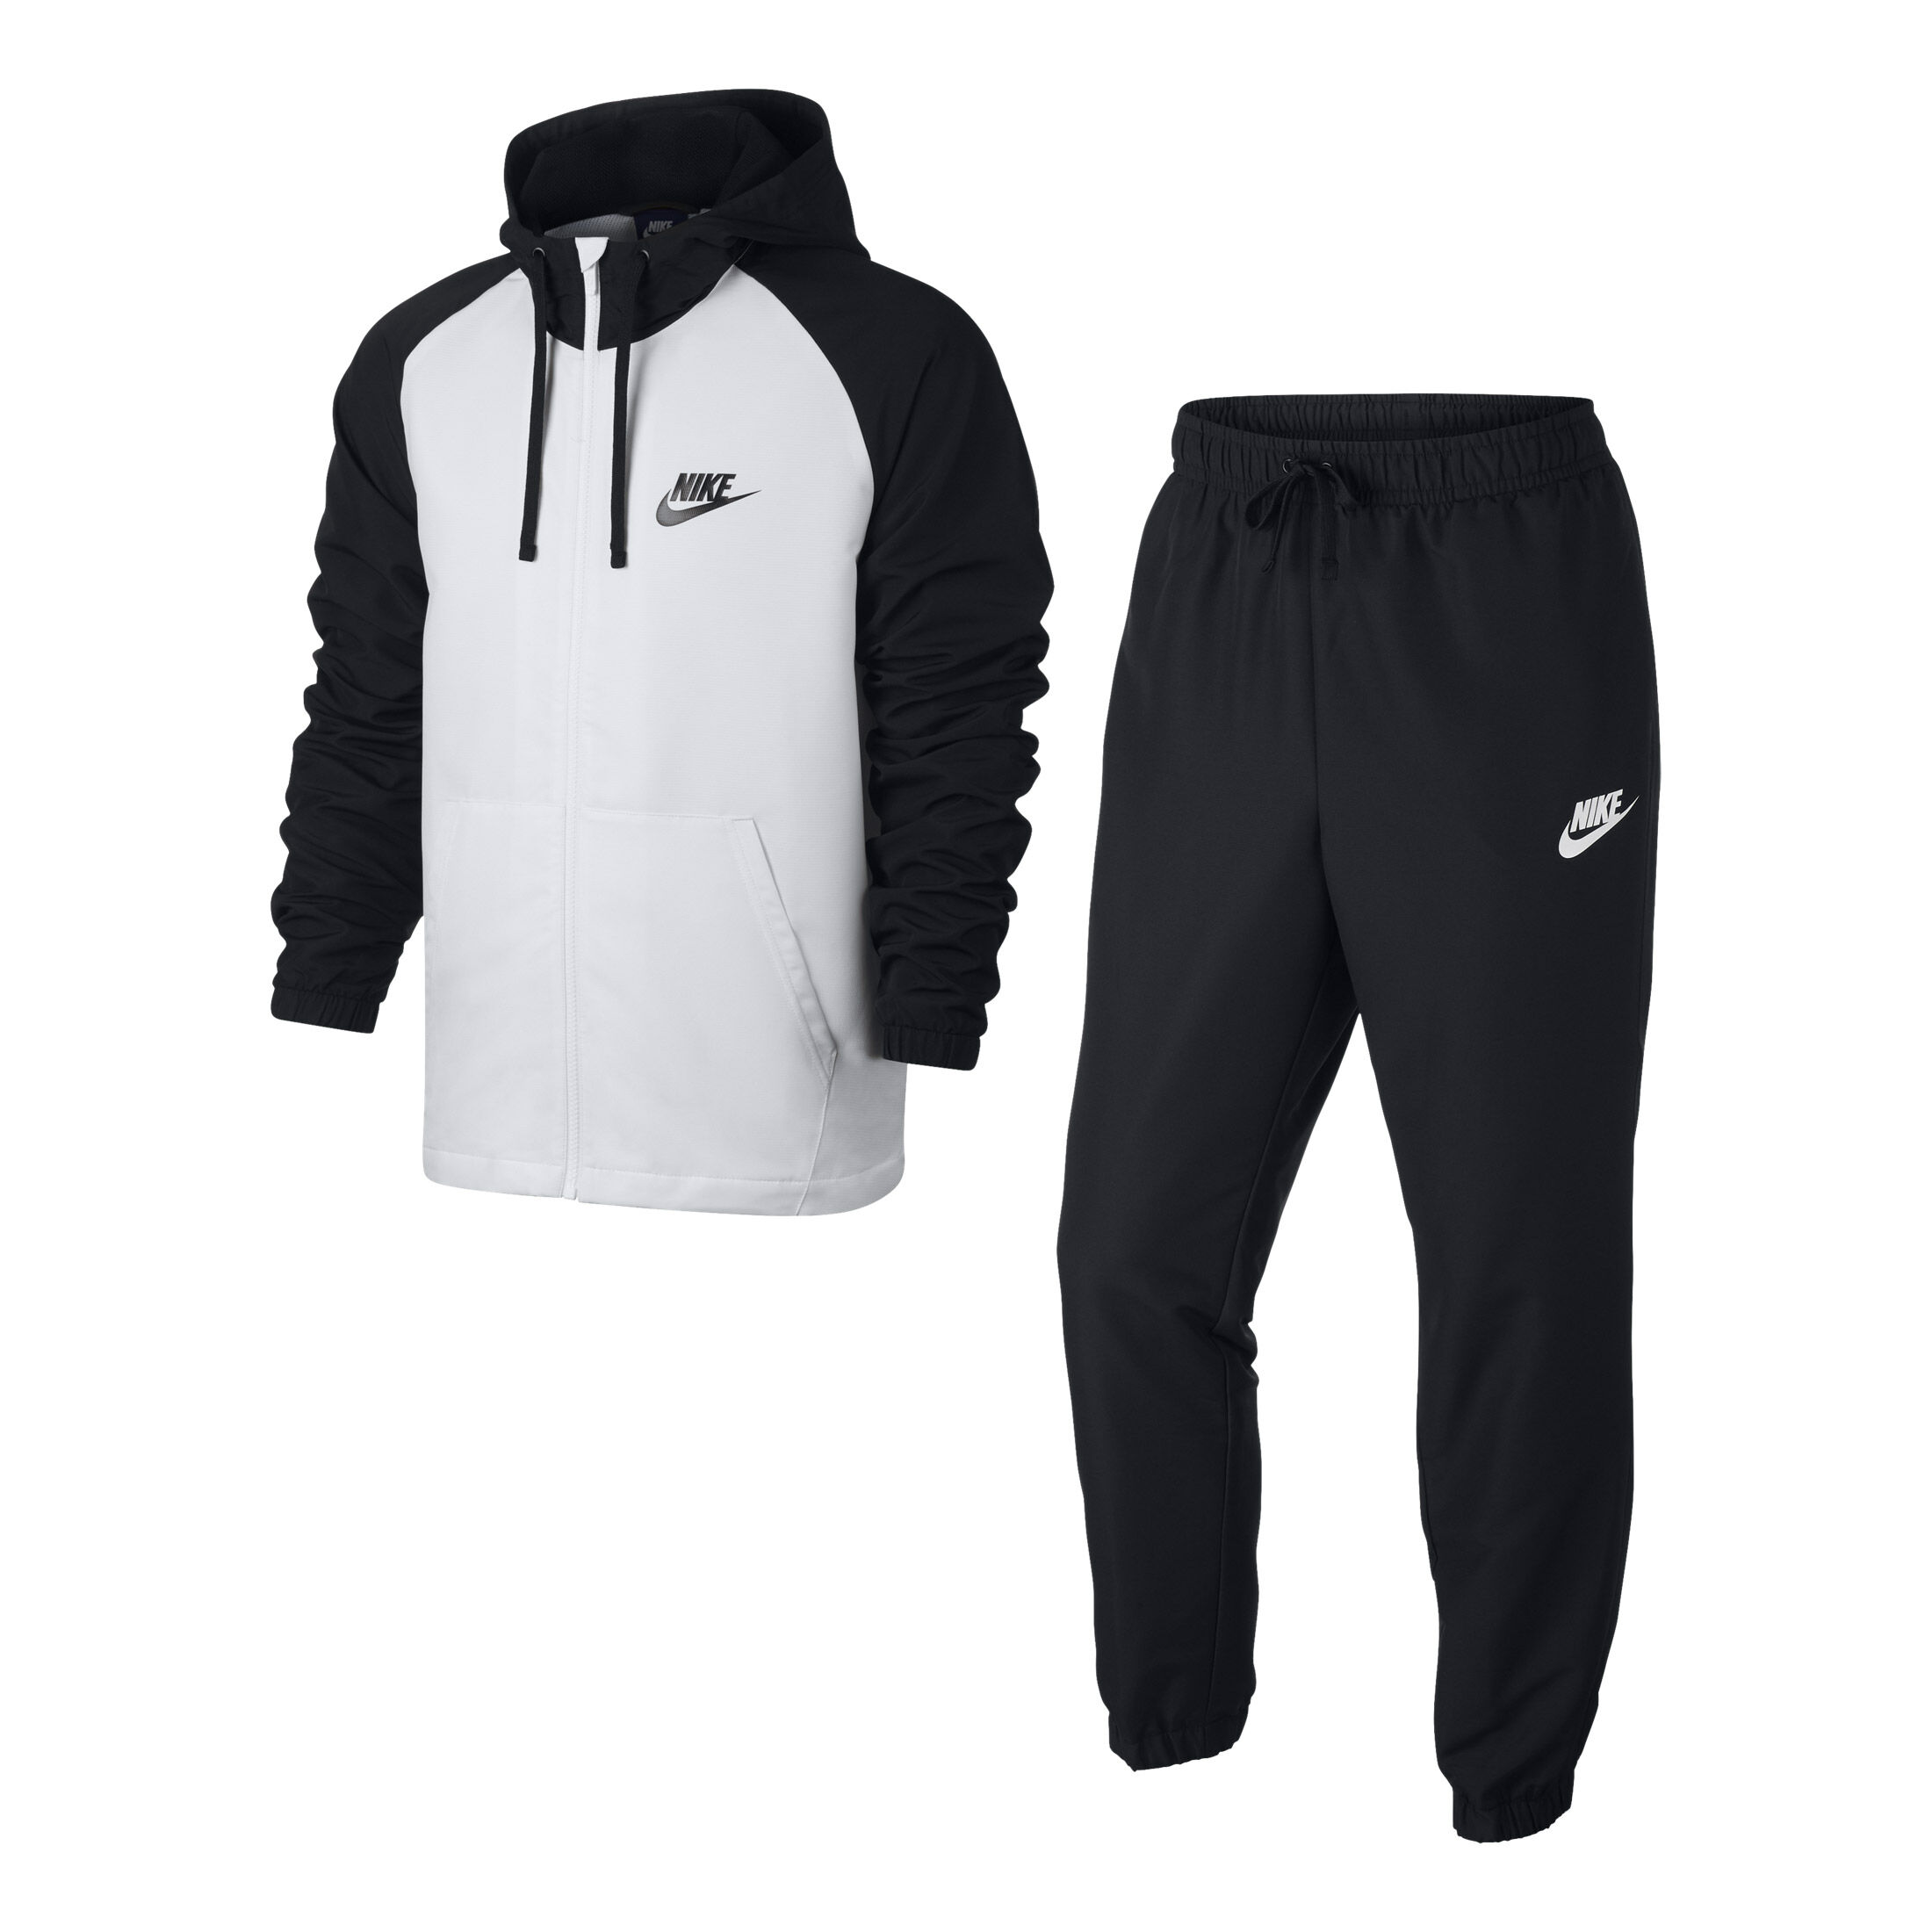 Nike Chándal Hombres - Negro, Blanco compra online | Tennis-Point